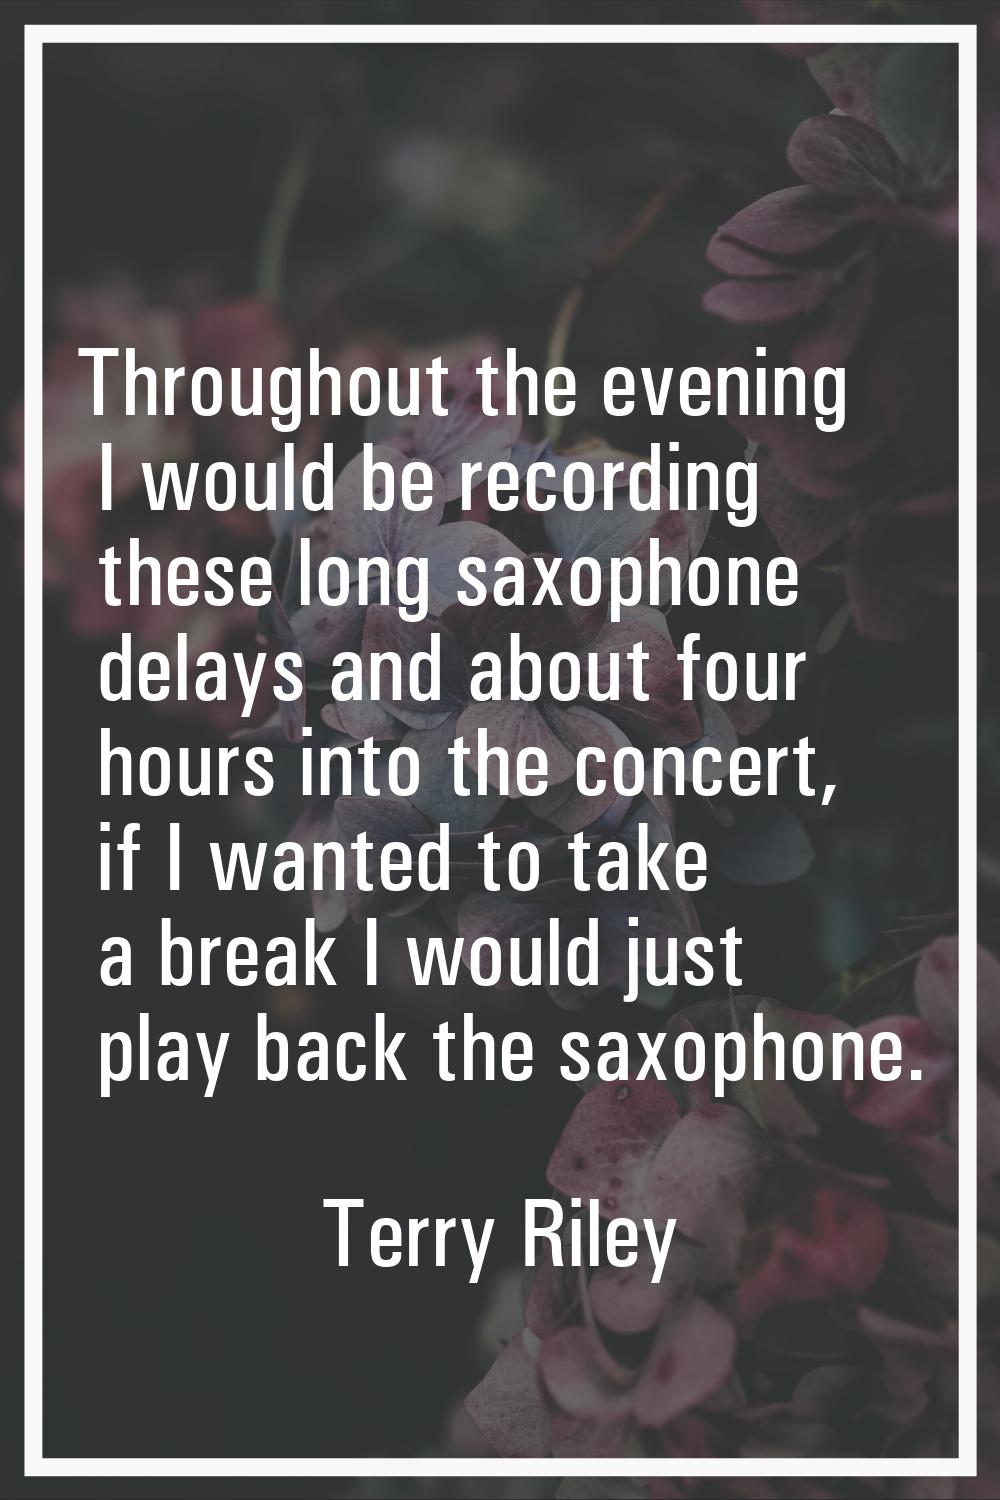 Throughout the evening I would be recording these long saxophone delays and about four hours into t